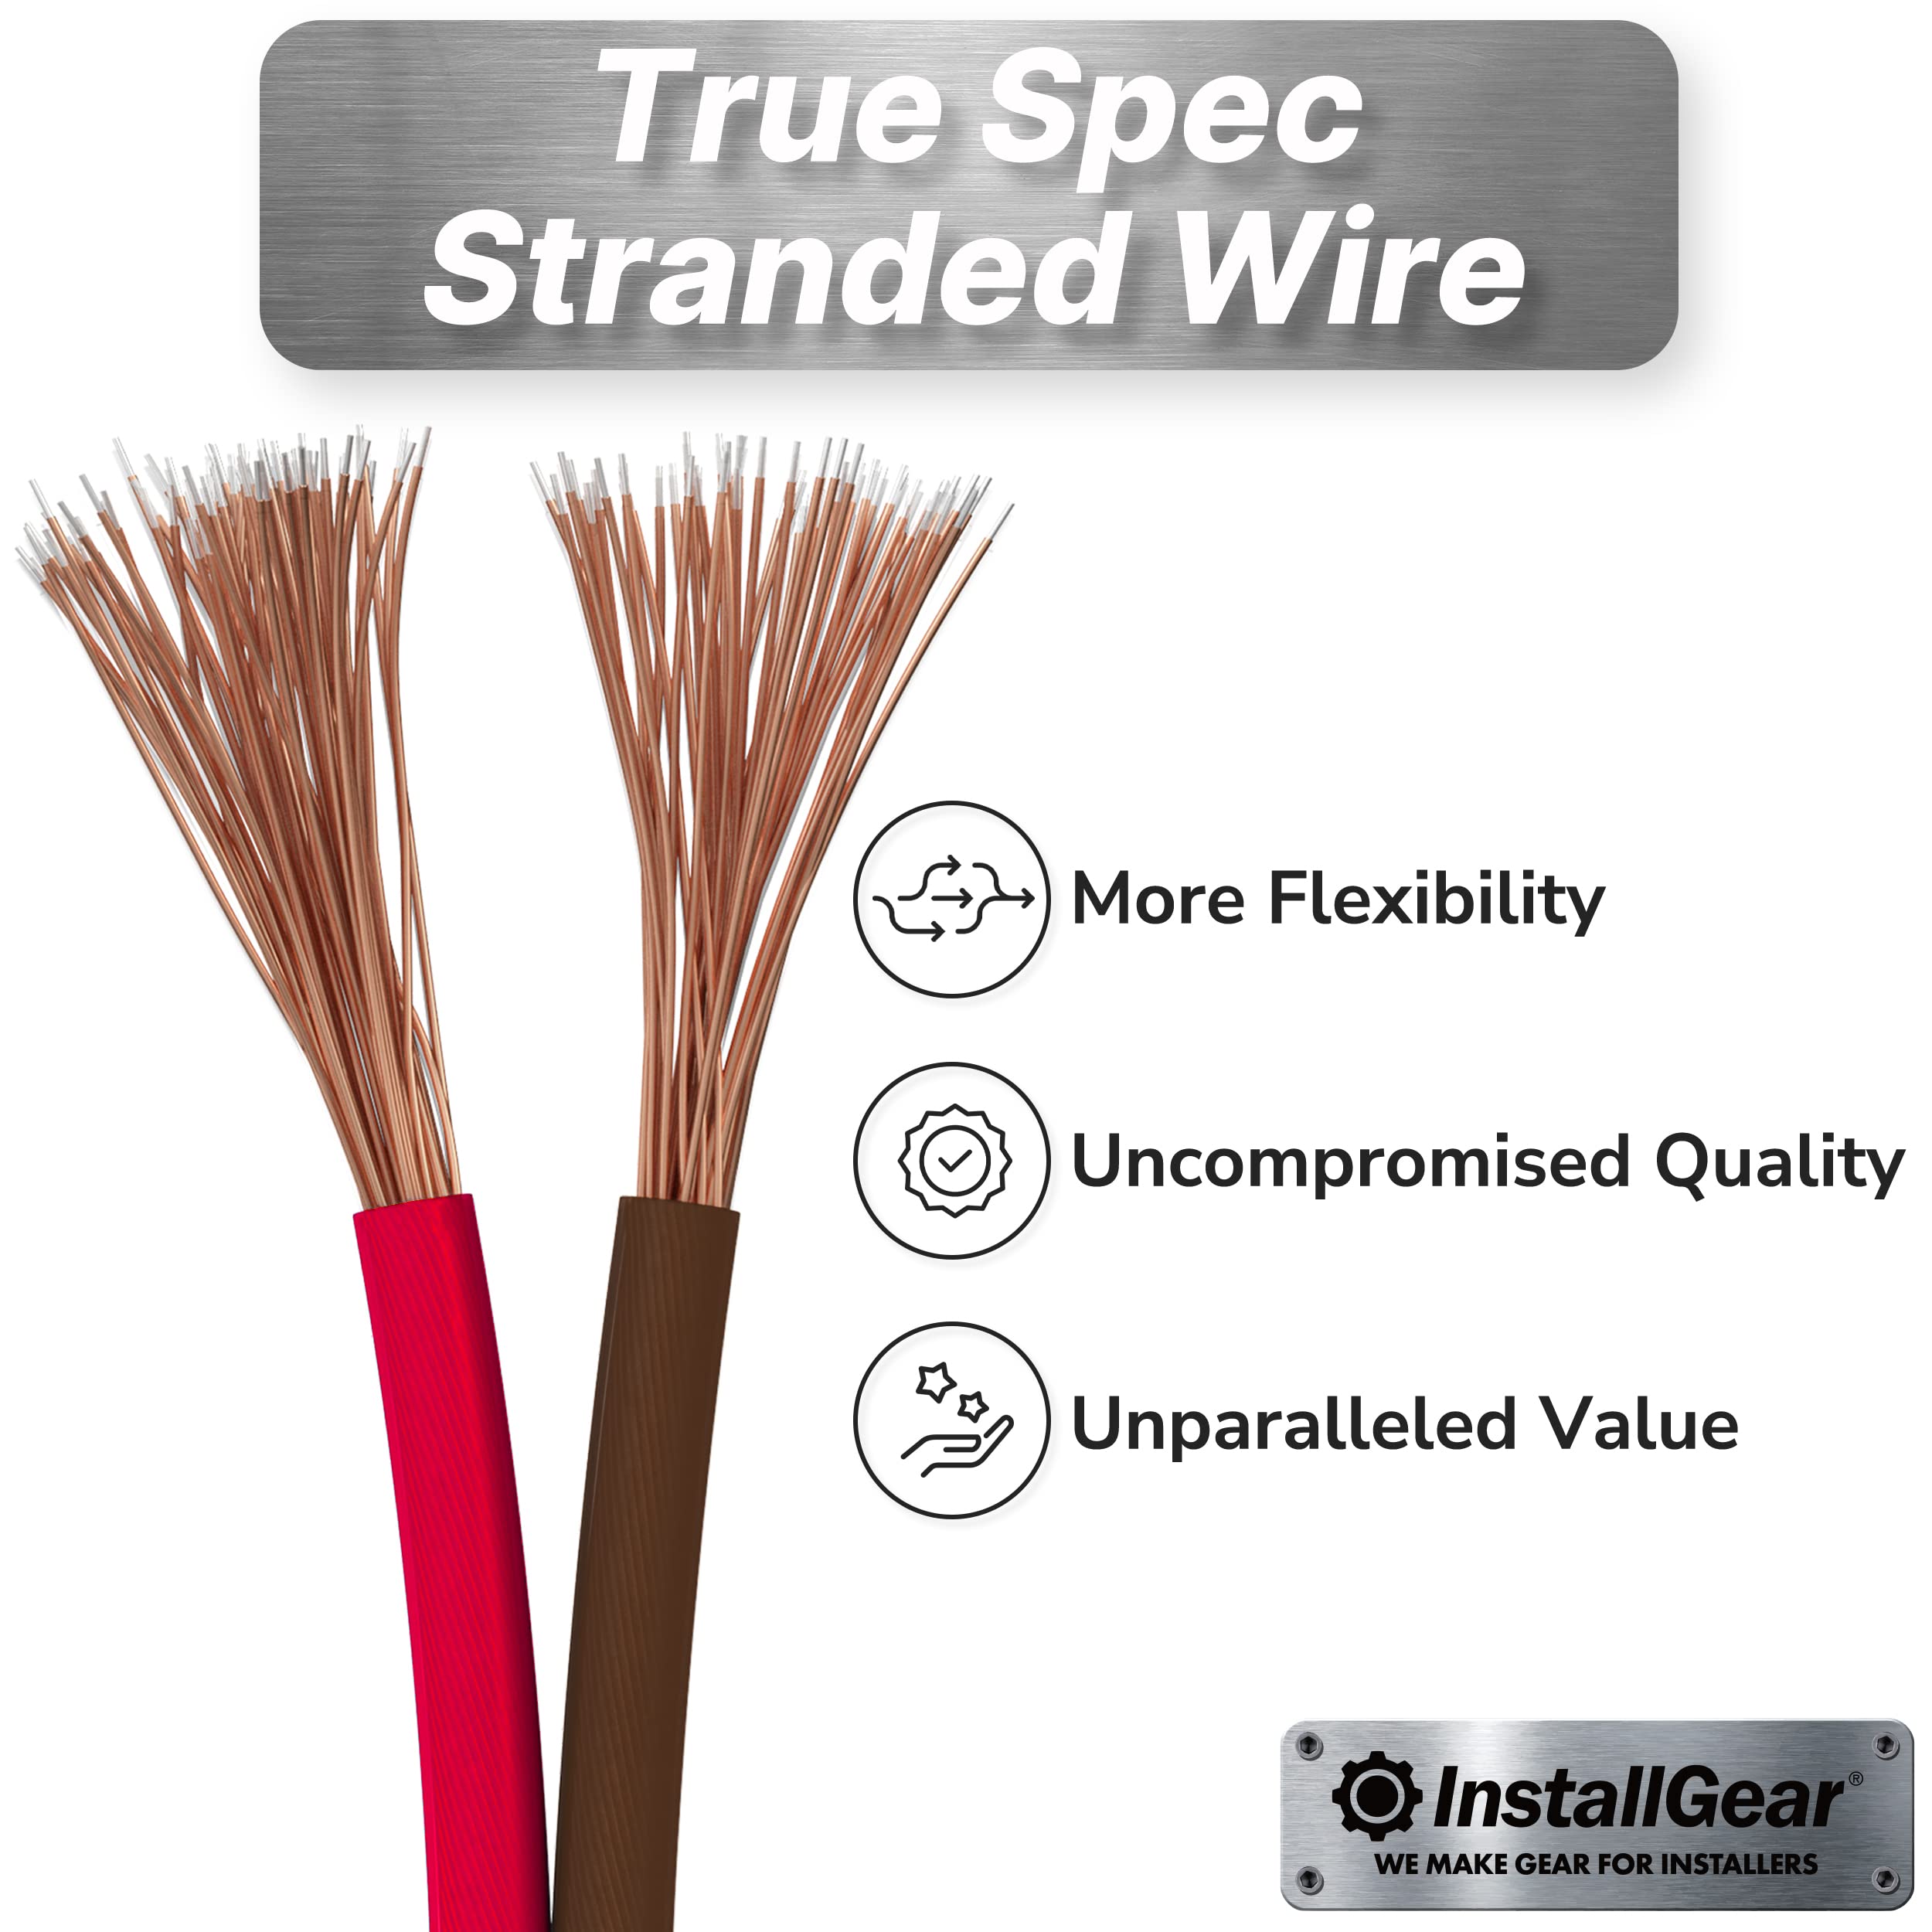 InstallGear 16 Gauge Wire AWG Speaker Wires True Spec and Soft Touch Cable Wire (100ft Red/Black) | Car Speaker Wire, Stereos, Home Theater Speakers, Surround Sound, Radio | 16 Gauge Speaker Wire  - Acceptable